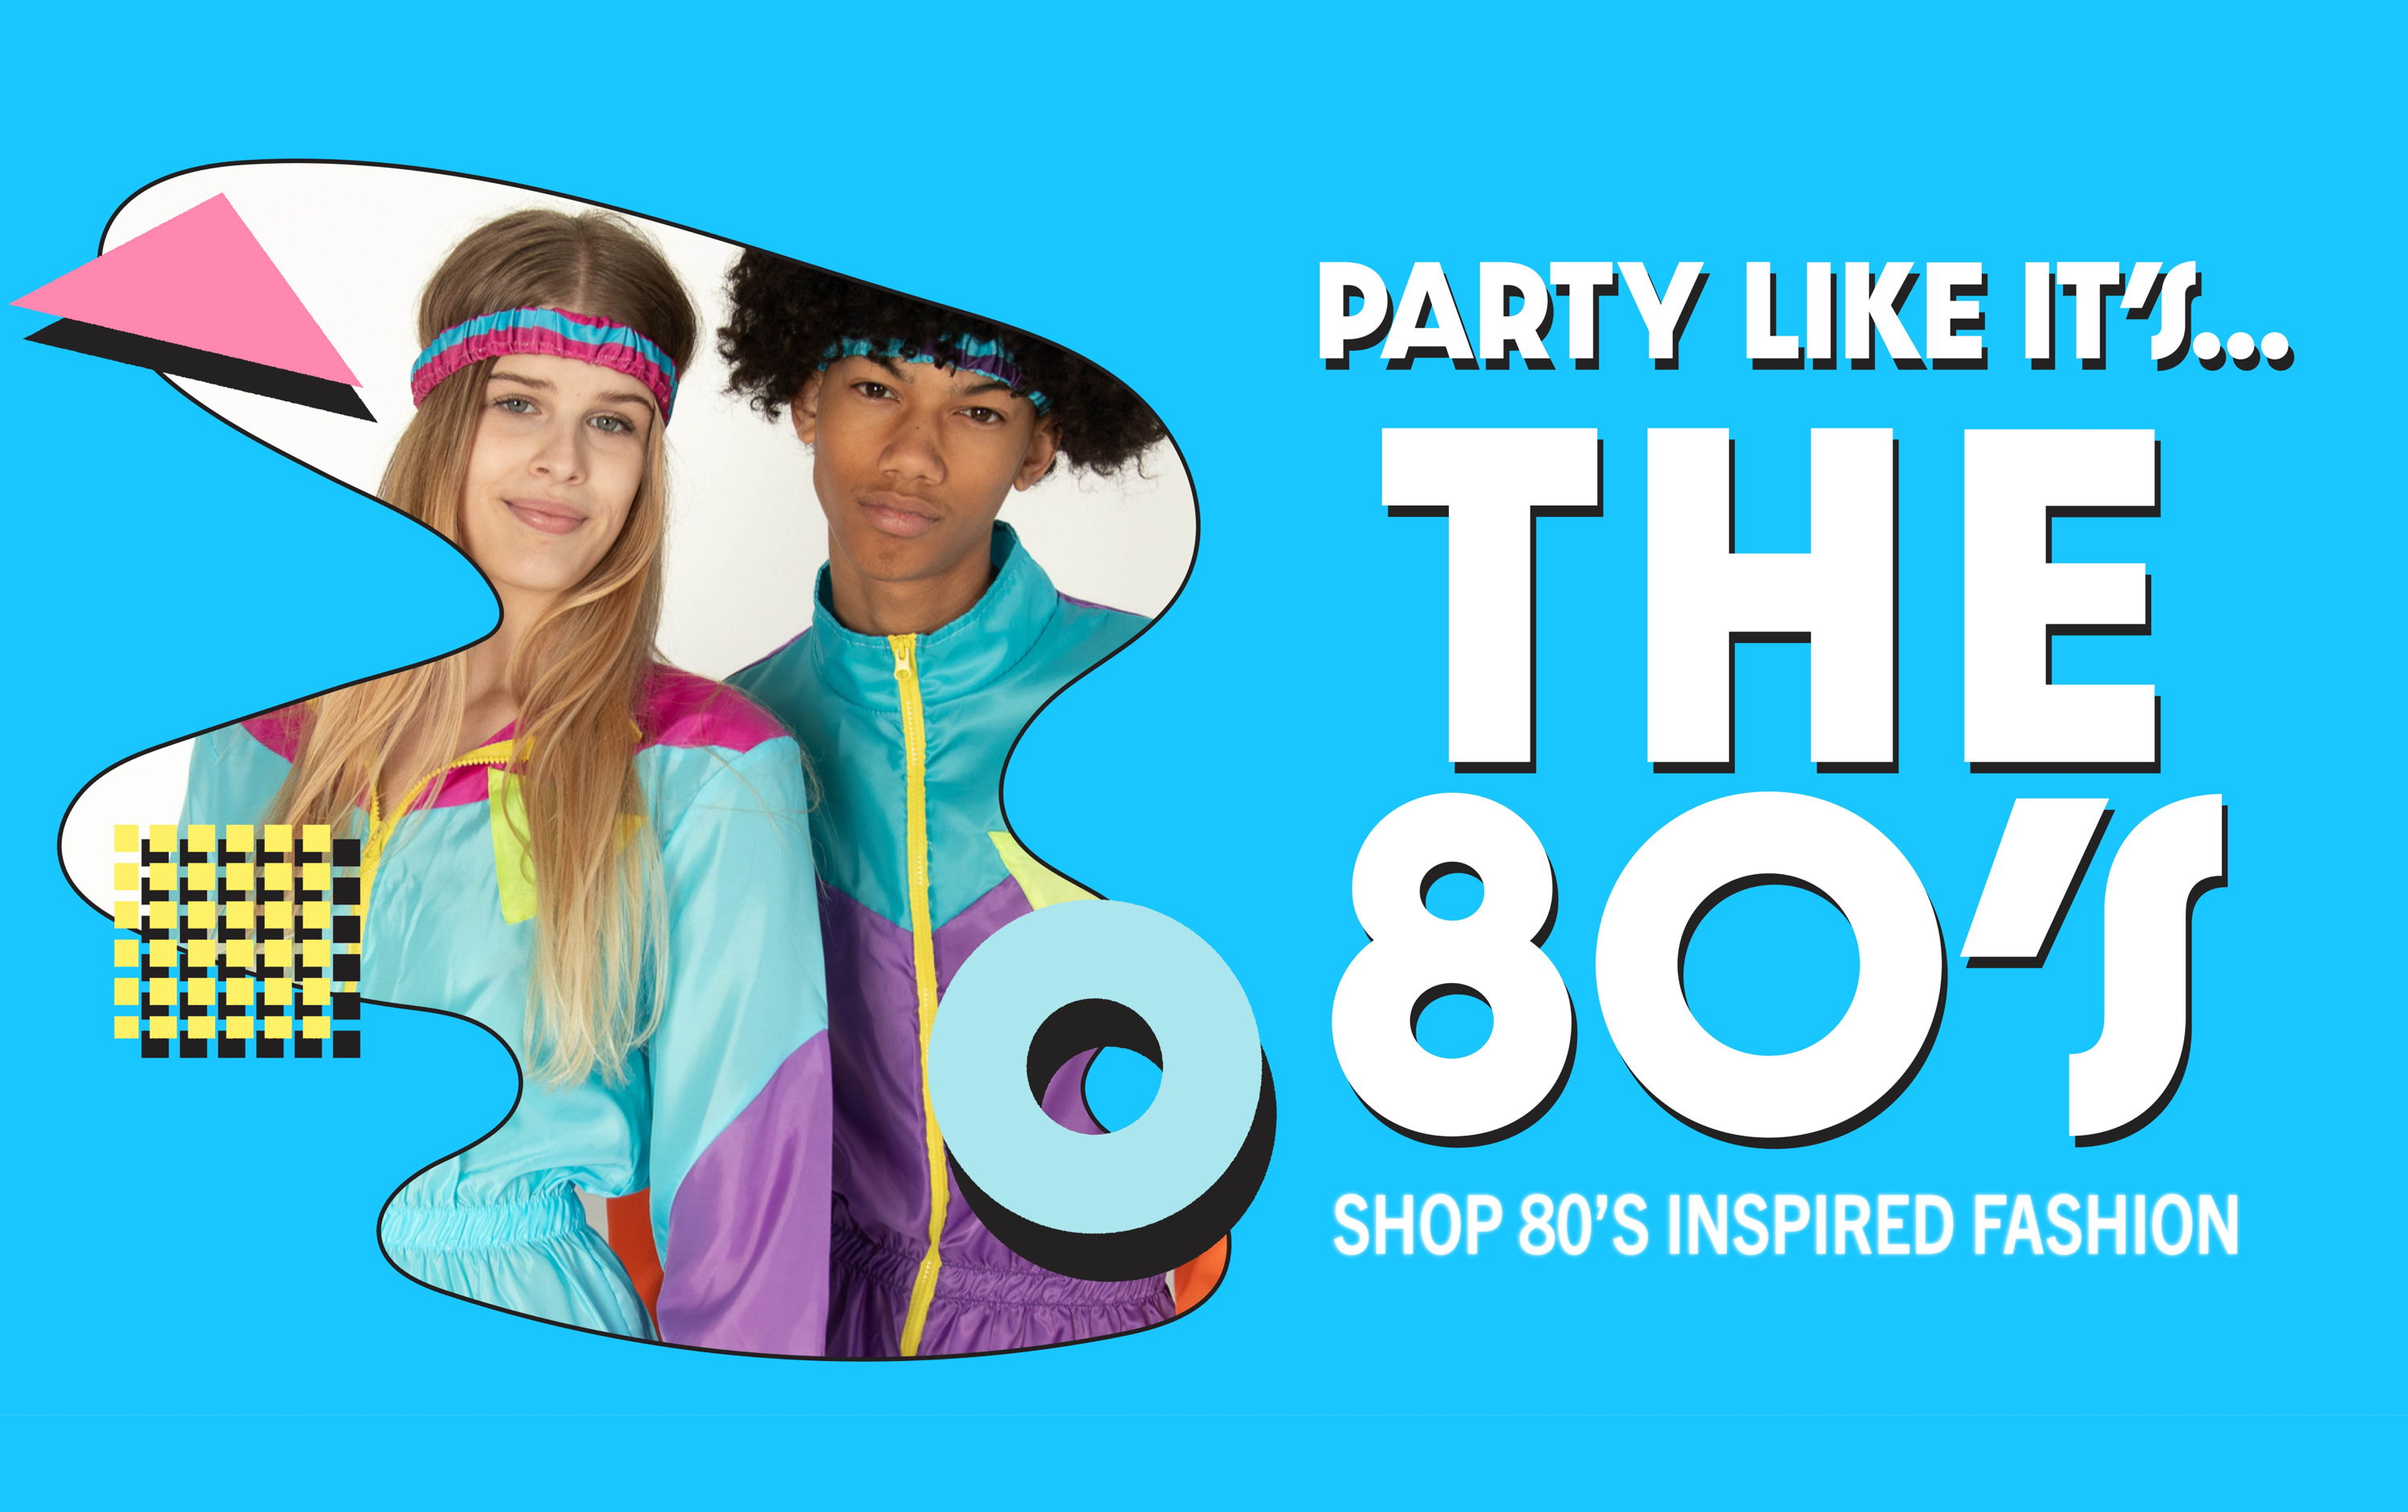 Party Like It's...The 80's. Shop 80's inspired fashion